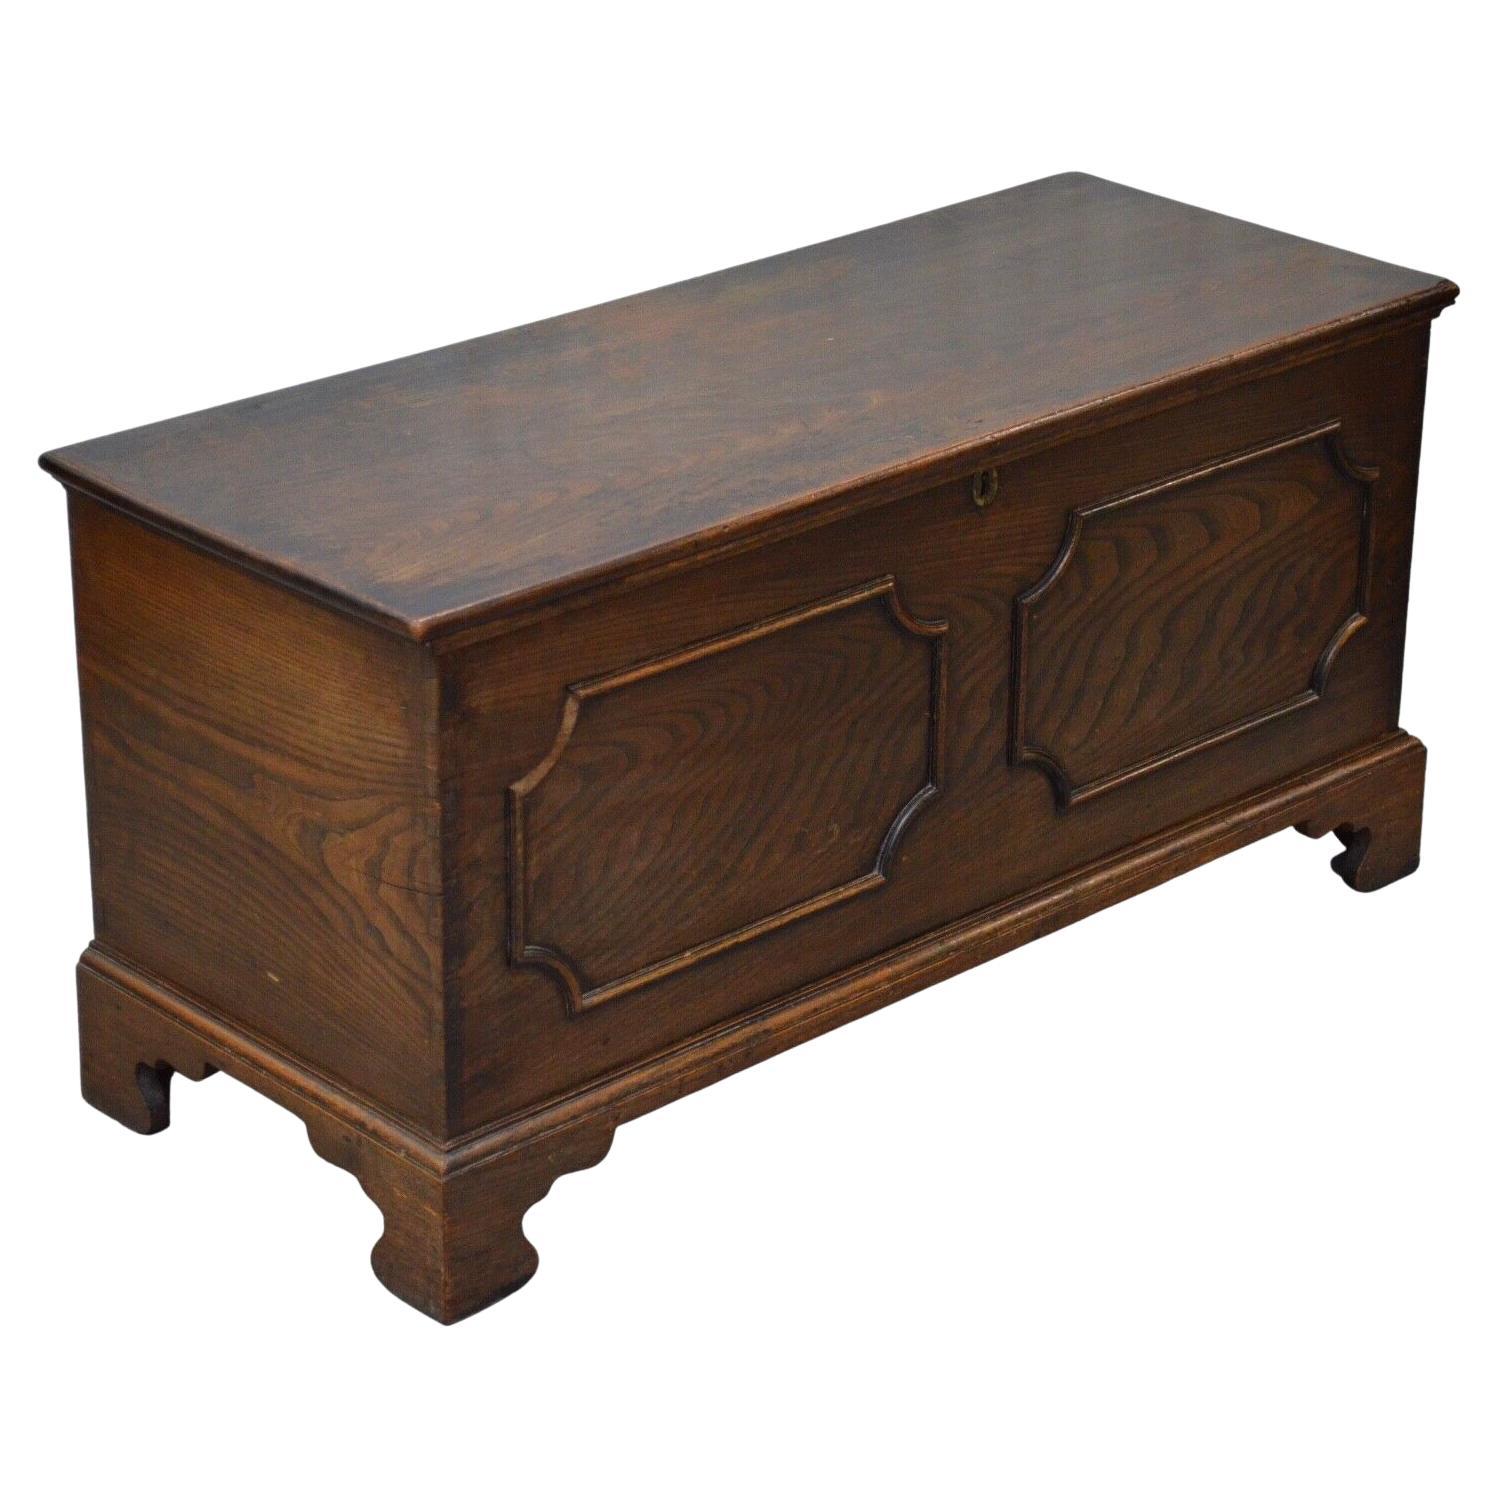 Georgian 18th Century Elm Coffer, Chest, Blanket Box, Trunk with a Hinged Lid